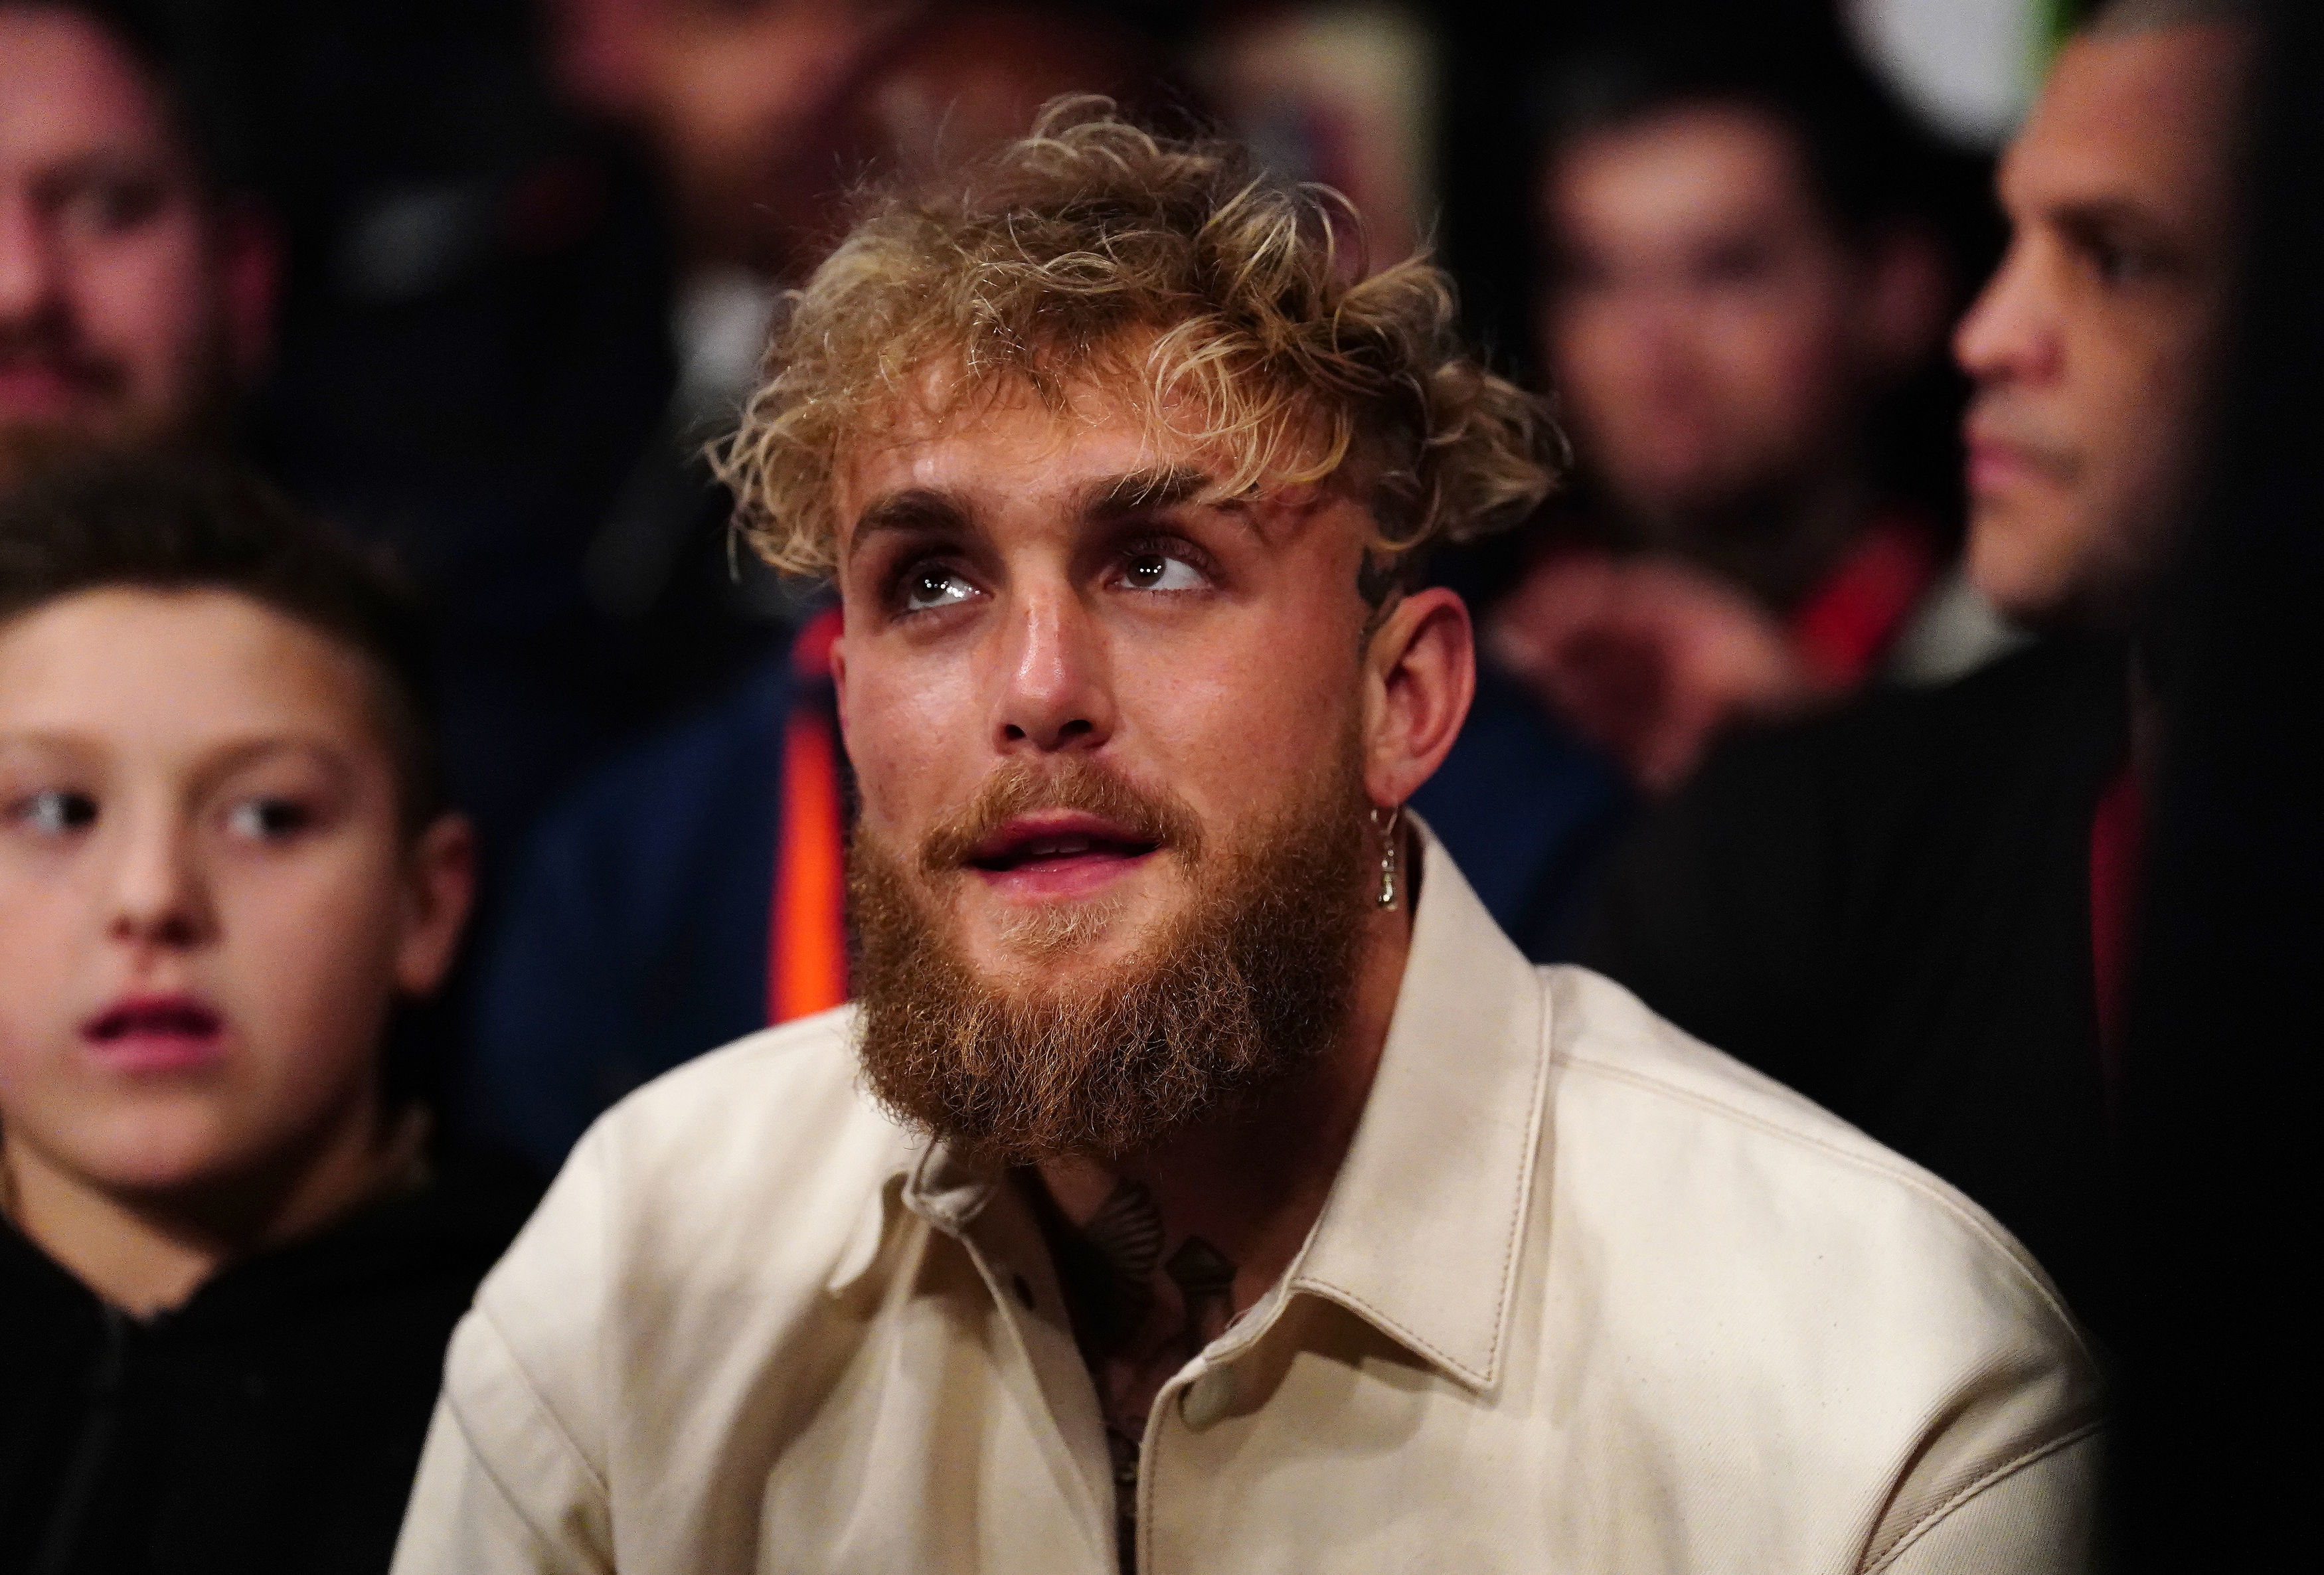 , Jake Paul claims he has ‘matured’ since ‘reckless’ attack on UFC star Conor McGregor’s wife Dee Devlin